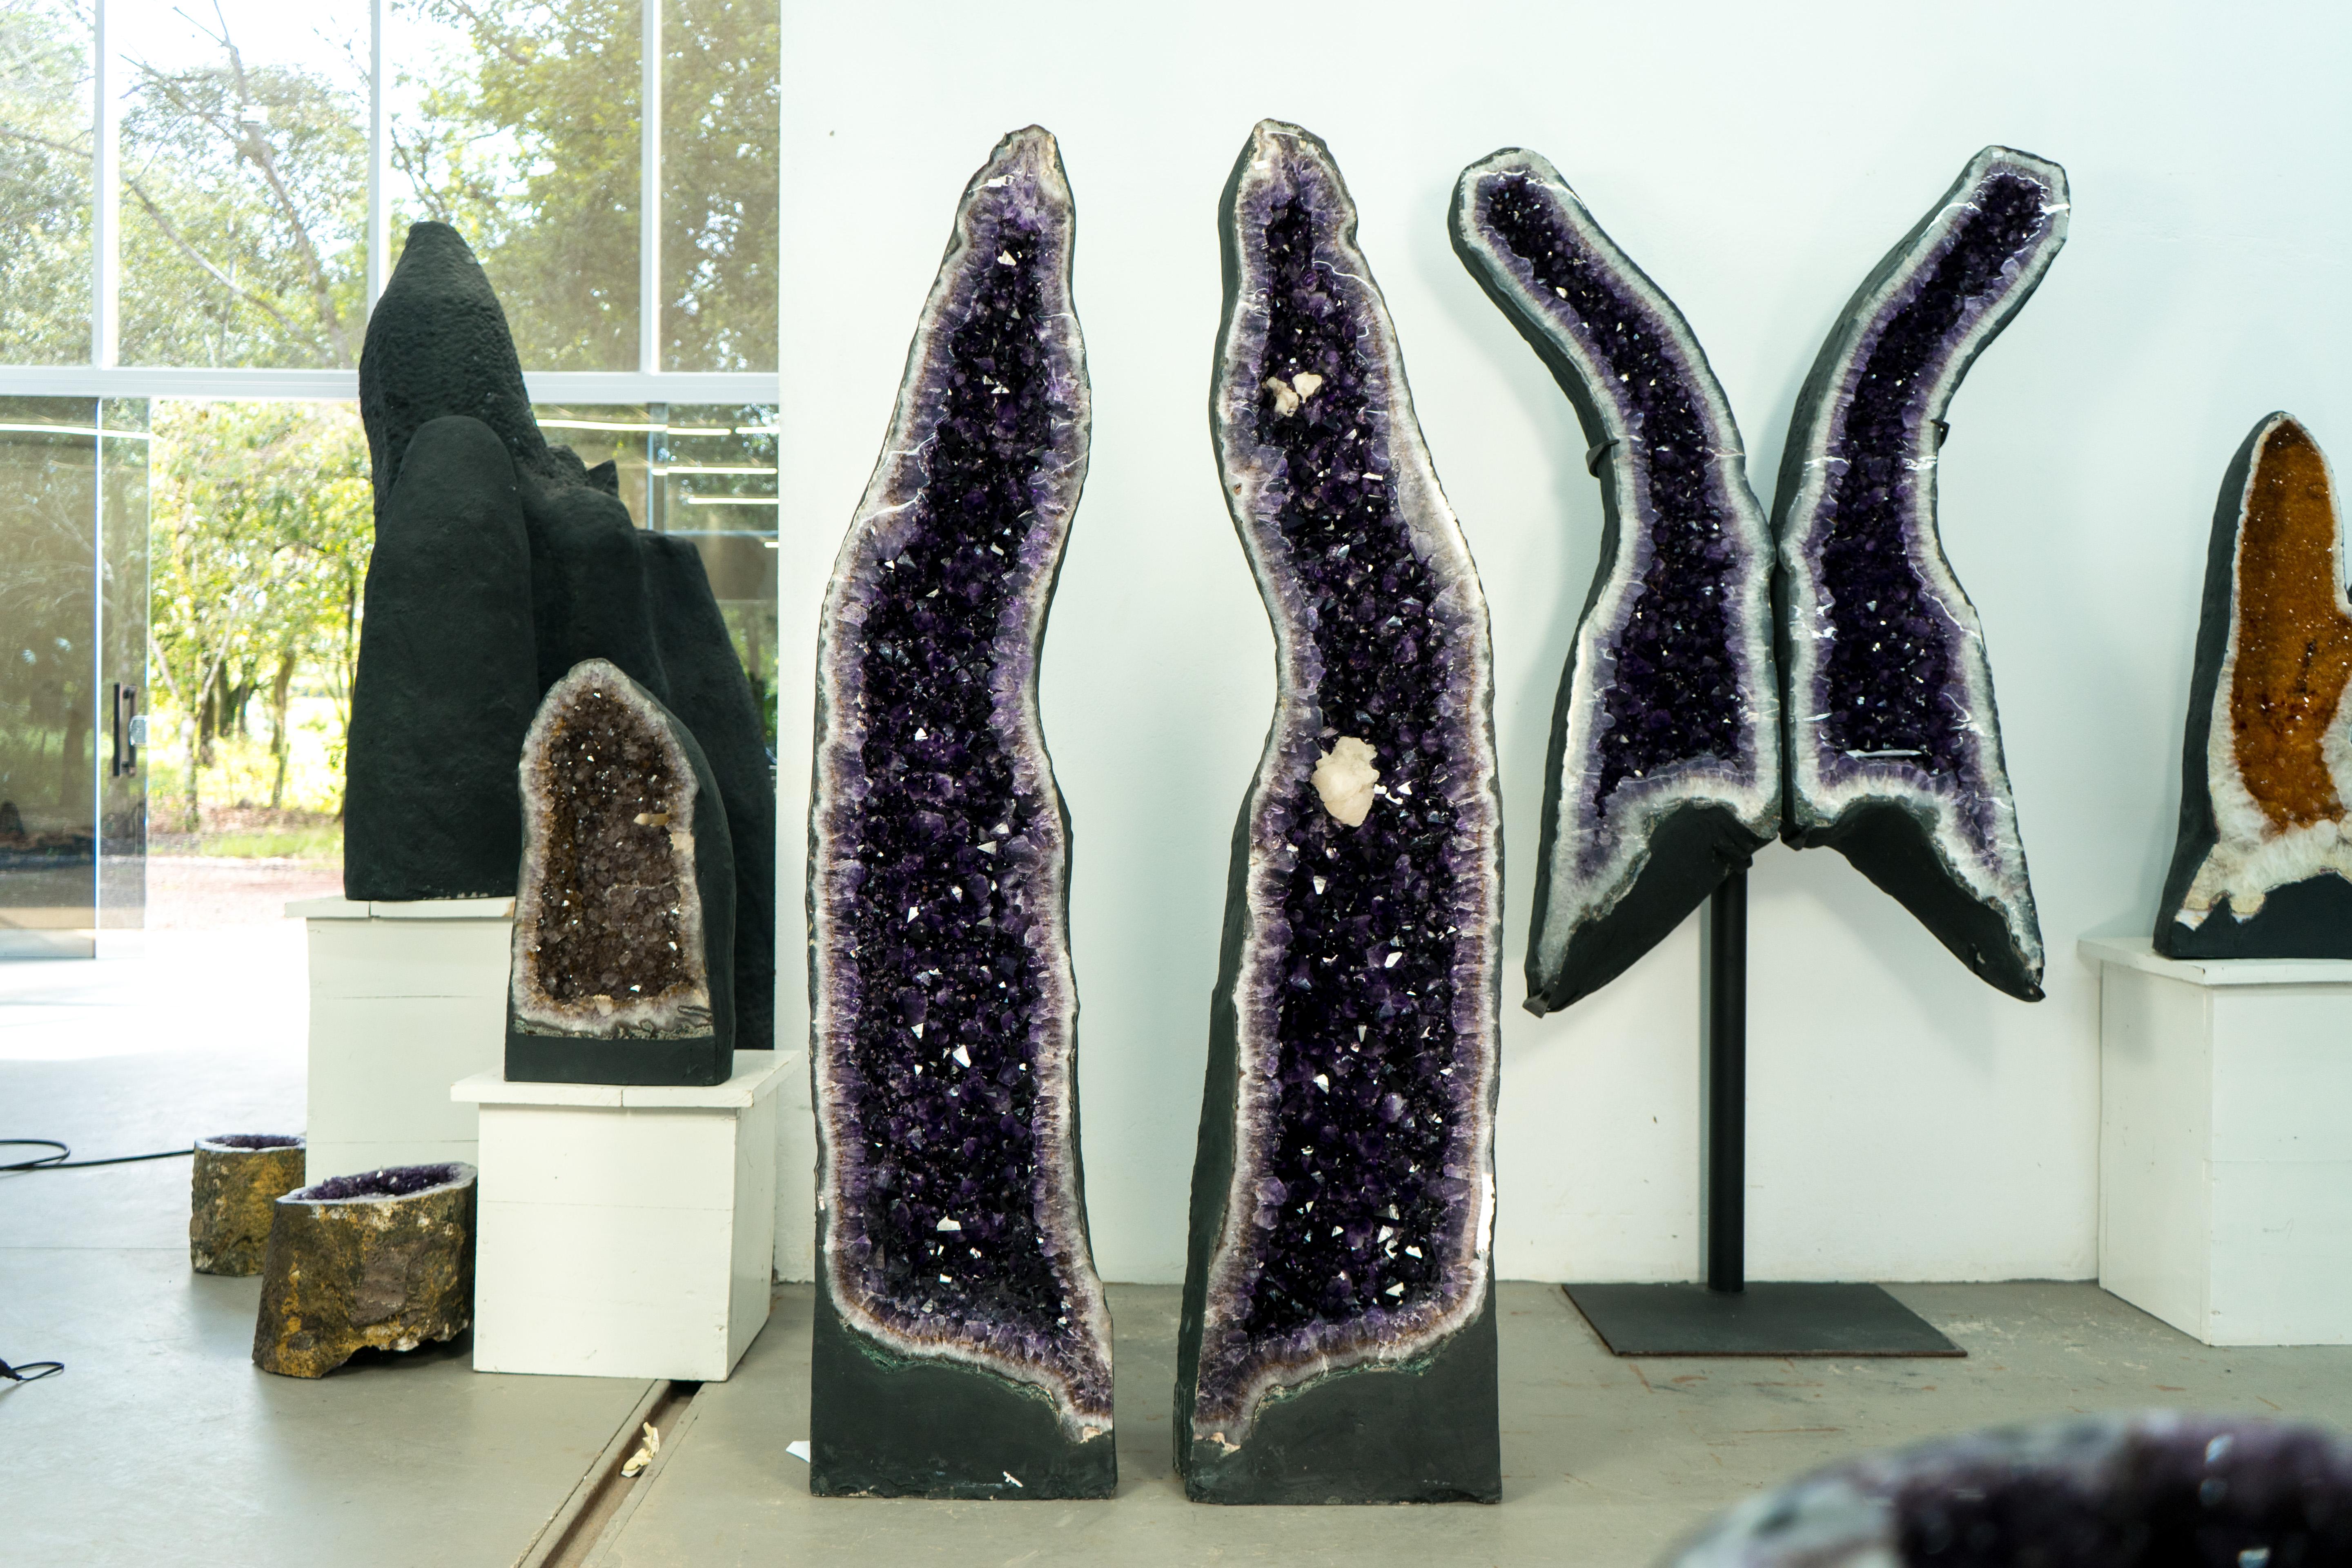 Majestic Pair of High-Grade Amethyst Geodes: 5.7 Feet Tall with Pure, Deep Purple Amethyst Druzy

▫️ Description

A breathtaking pair of Amethyst Geodes, these natural wonders stand at an impressive 5.7 feet tall (180cm) and showcase a glittering